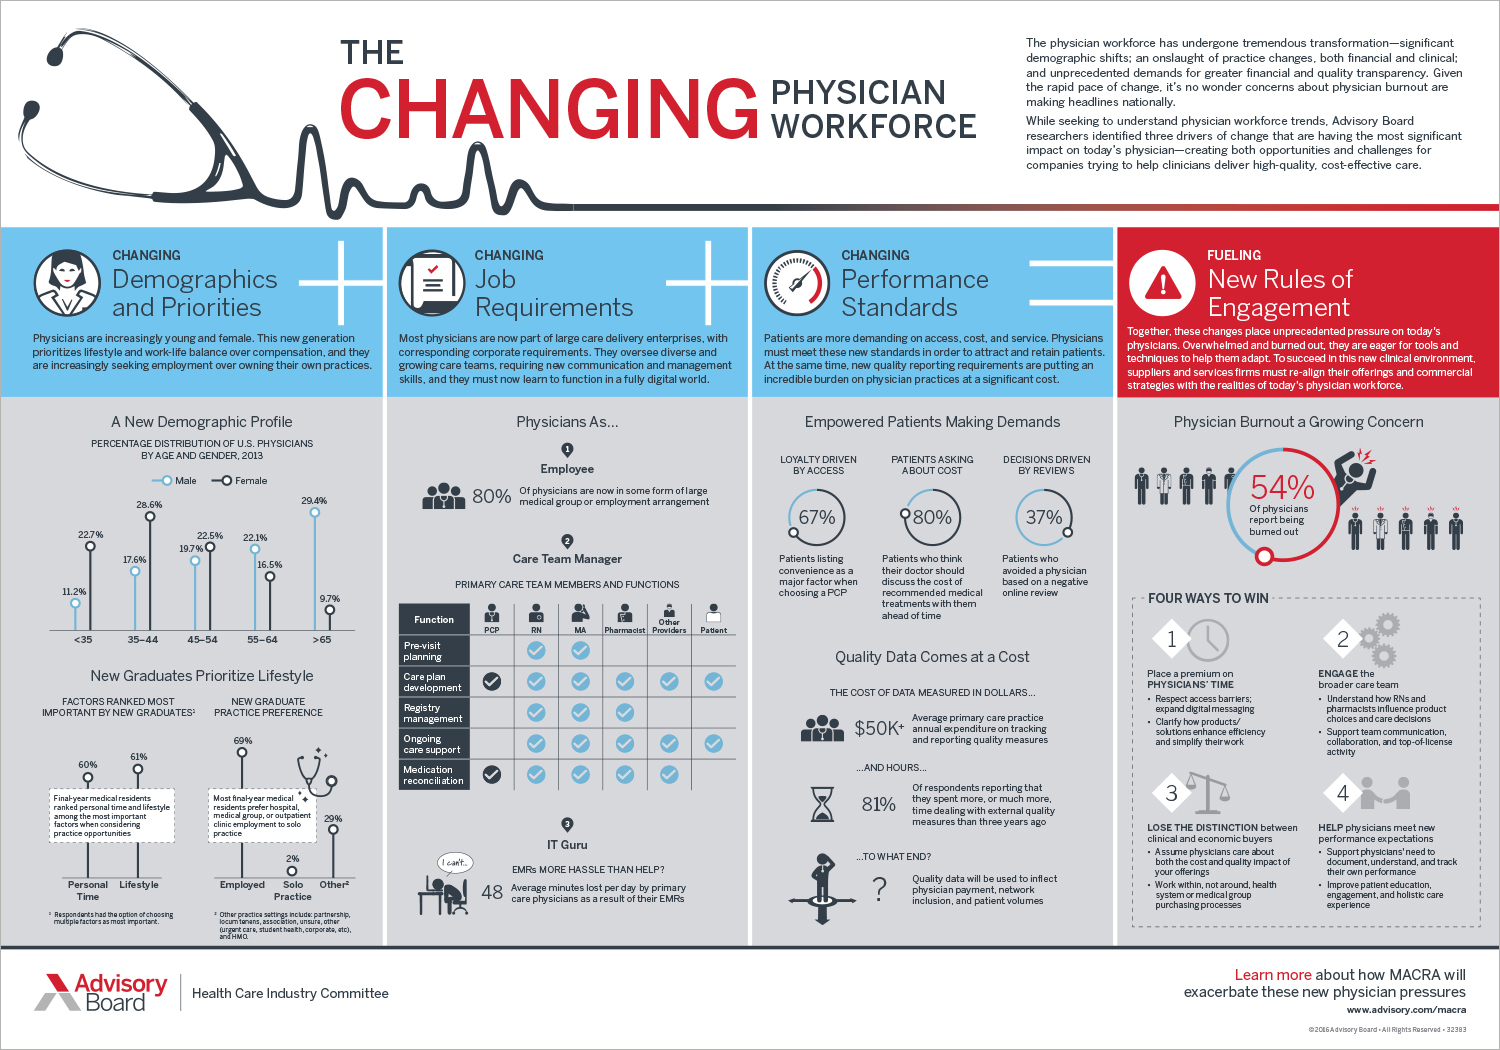 The changing physician workforce